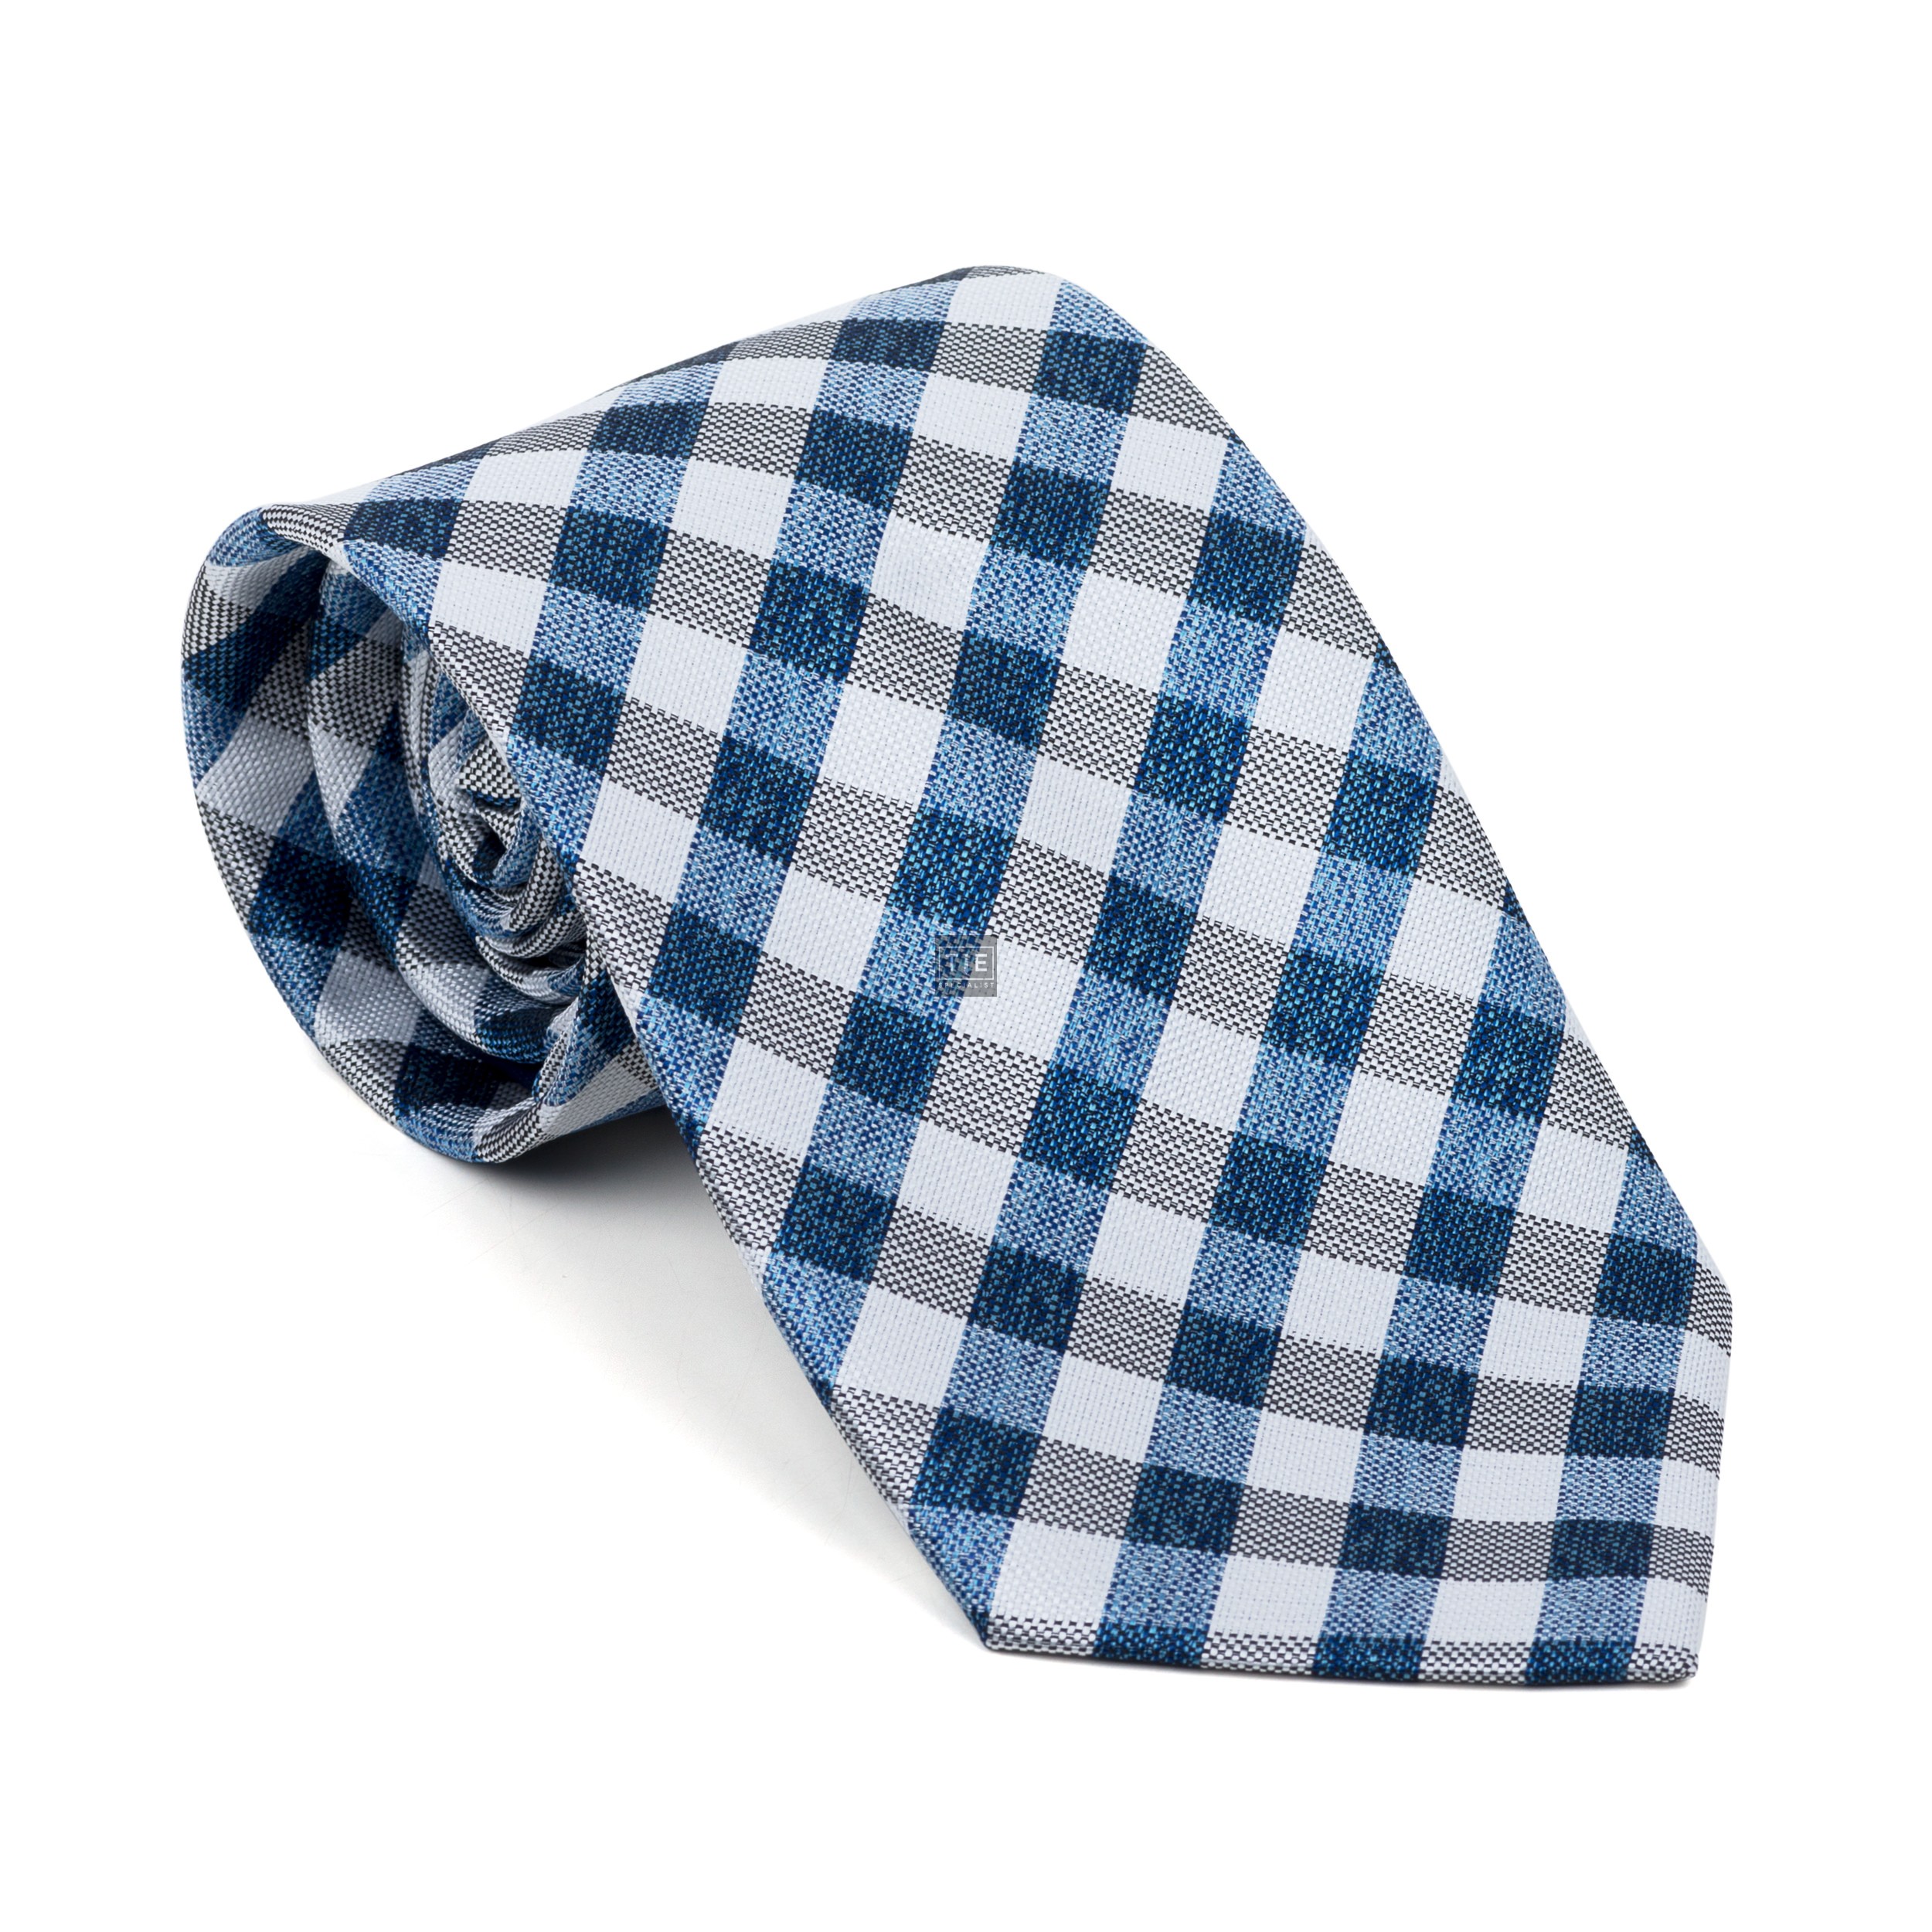 Neat Check Formal Tie